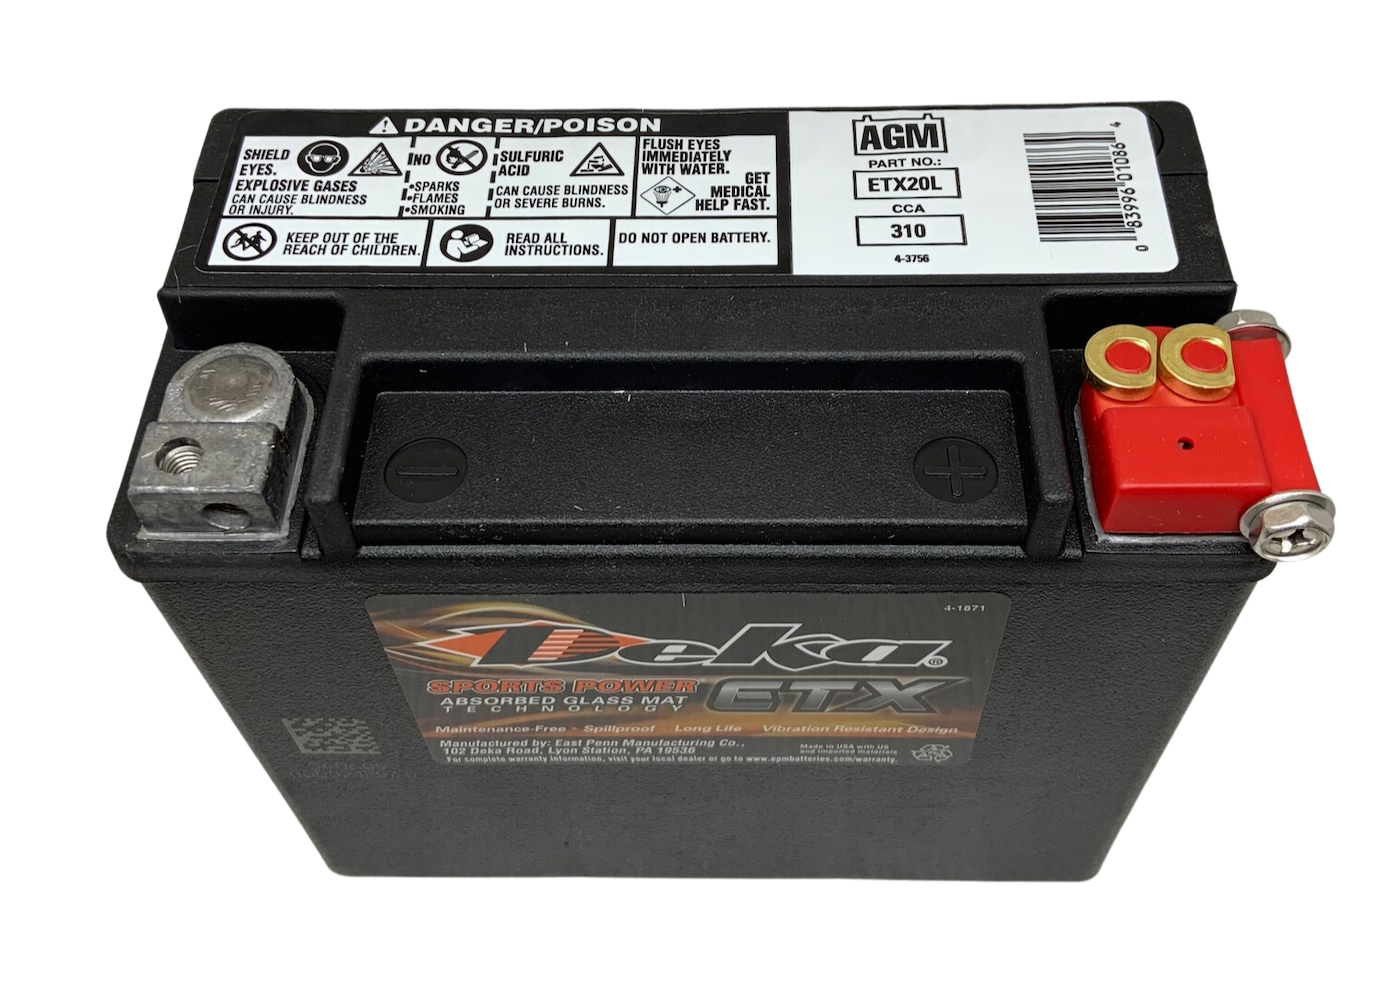 will this battery fit in a JS 550 jetski ? Also do you carry a HP battery for a 1972R5 yamaha 350 ?..Thanks